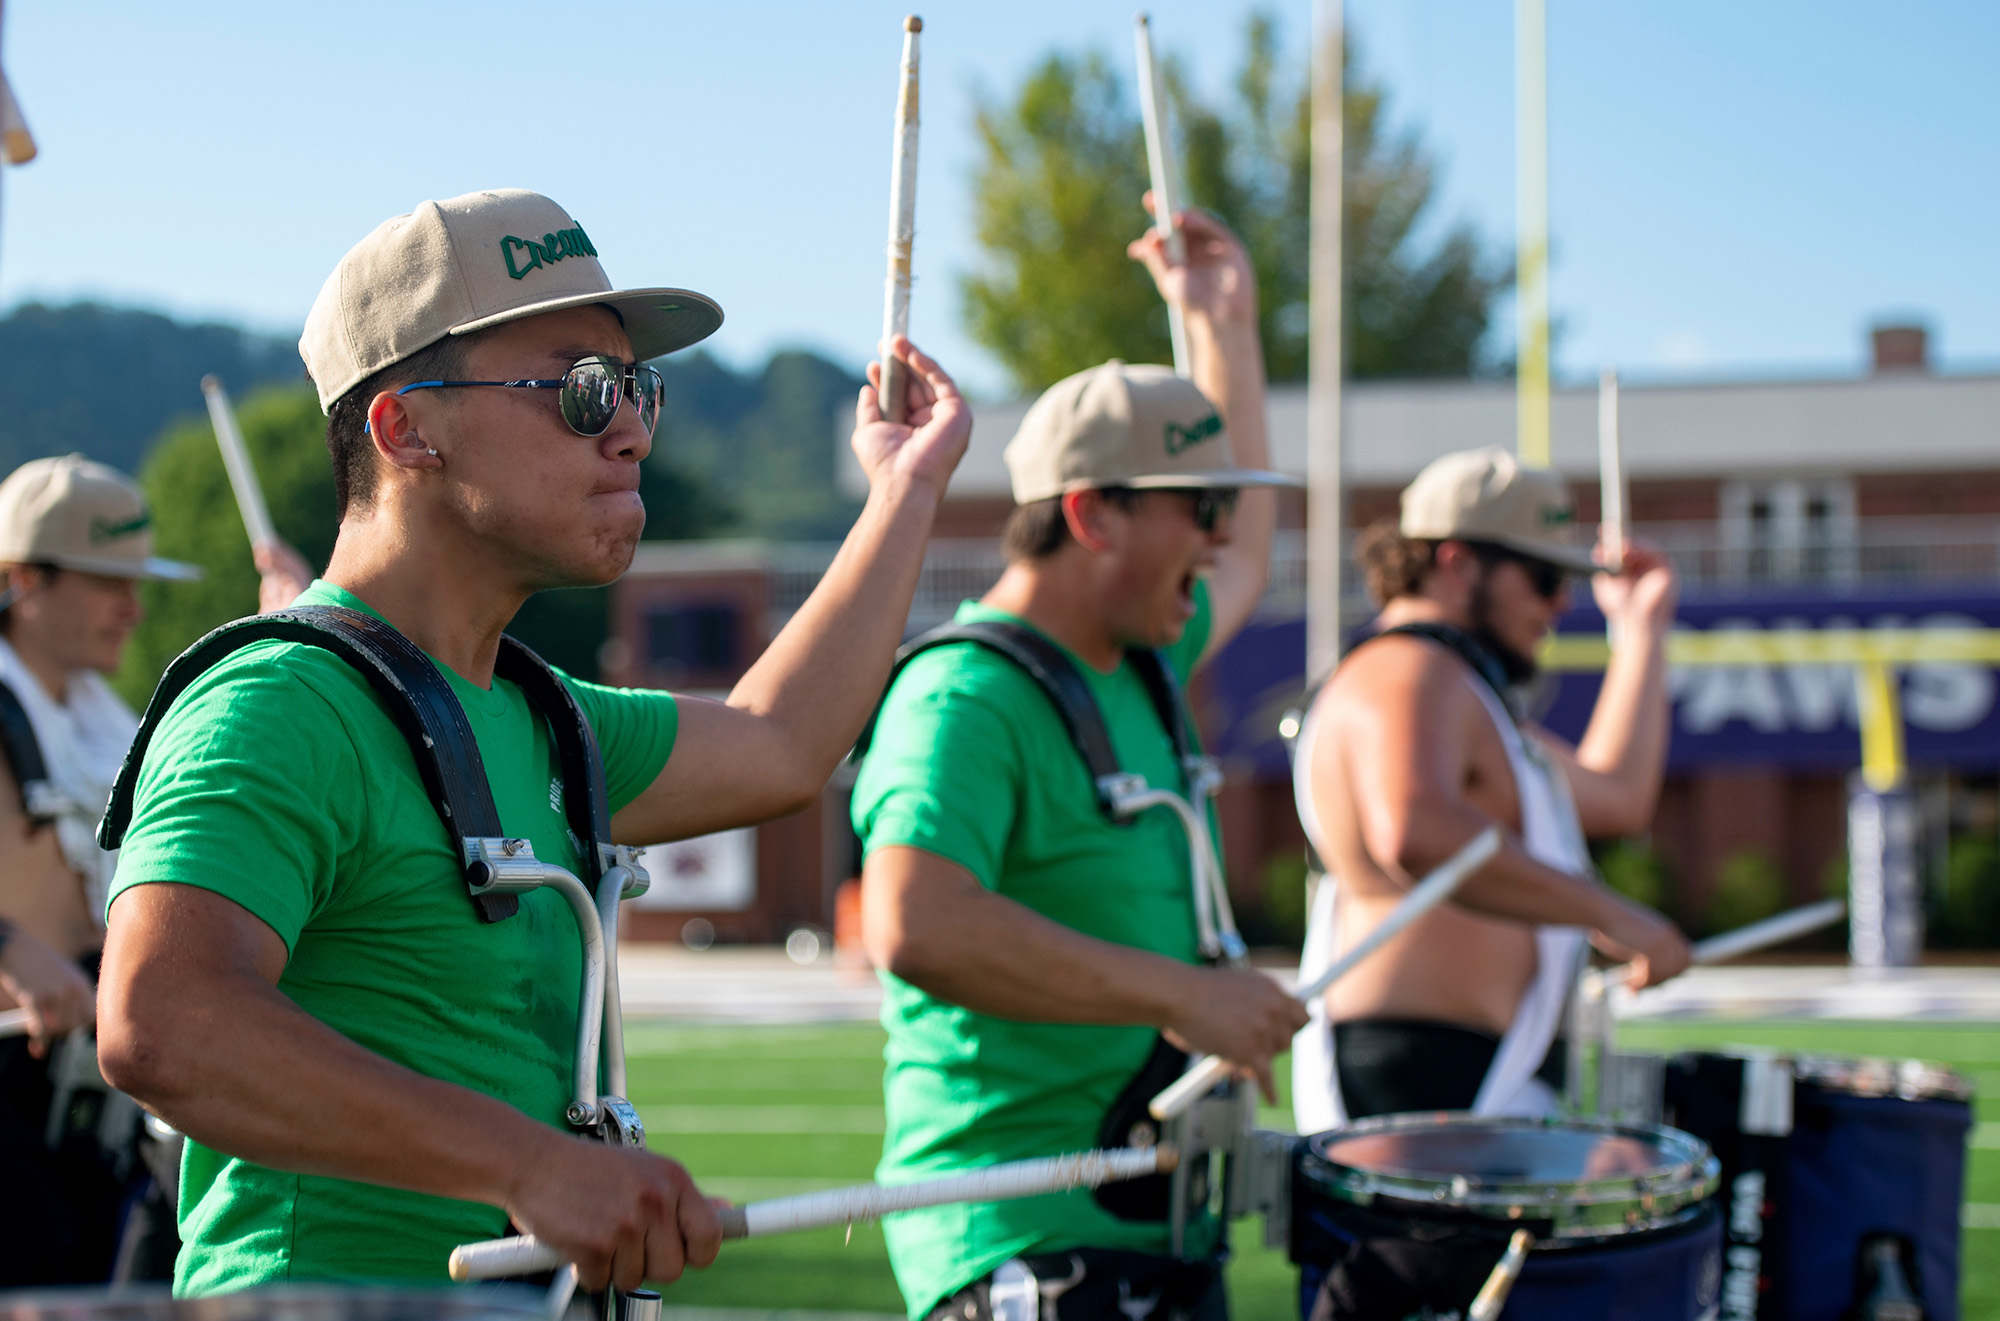 Pride of the Mountains Band playing drums